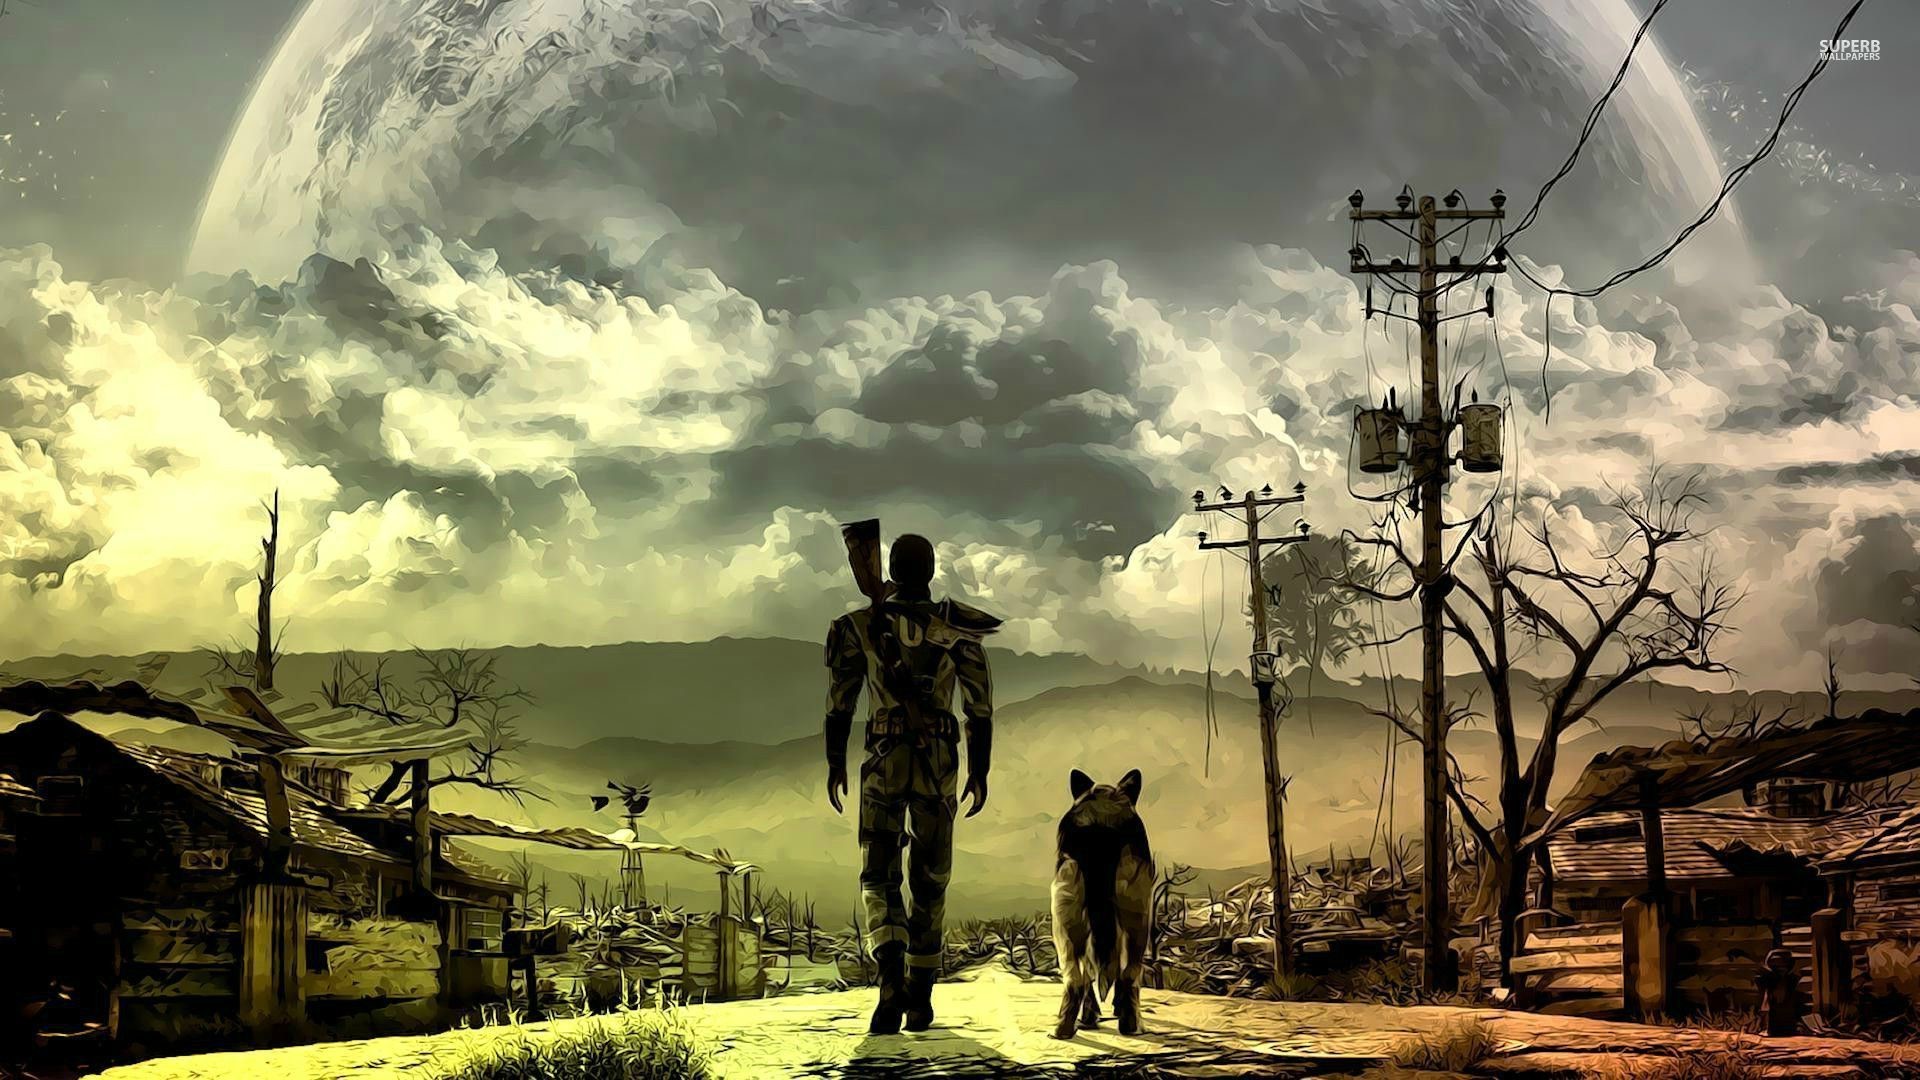 1920x1080 Fallout Wallpapers Wallpaper | HD Wallpapers | Pinterest | Fallout and  Wallpaper